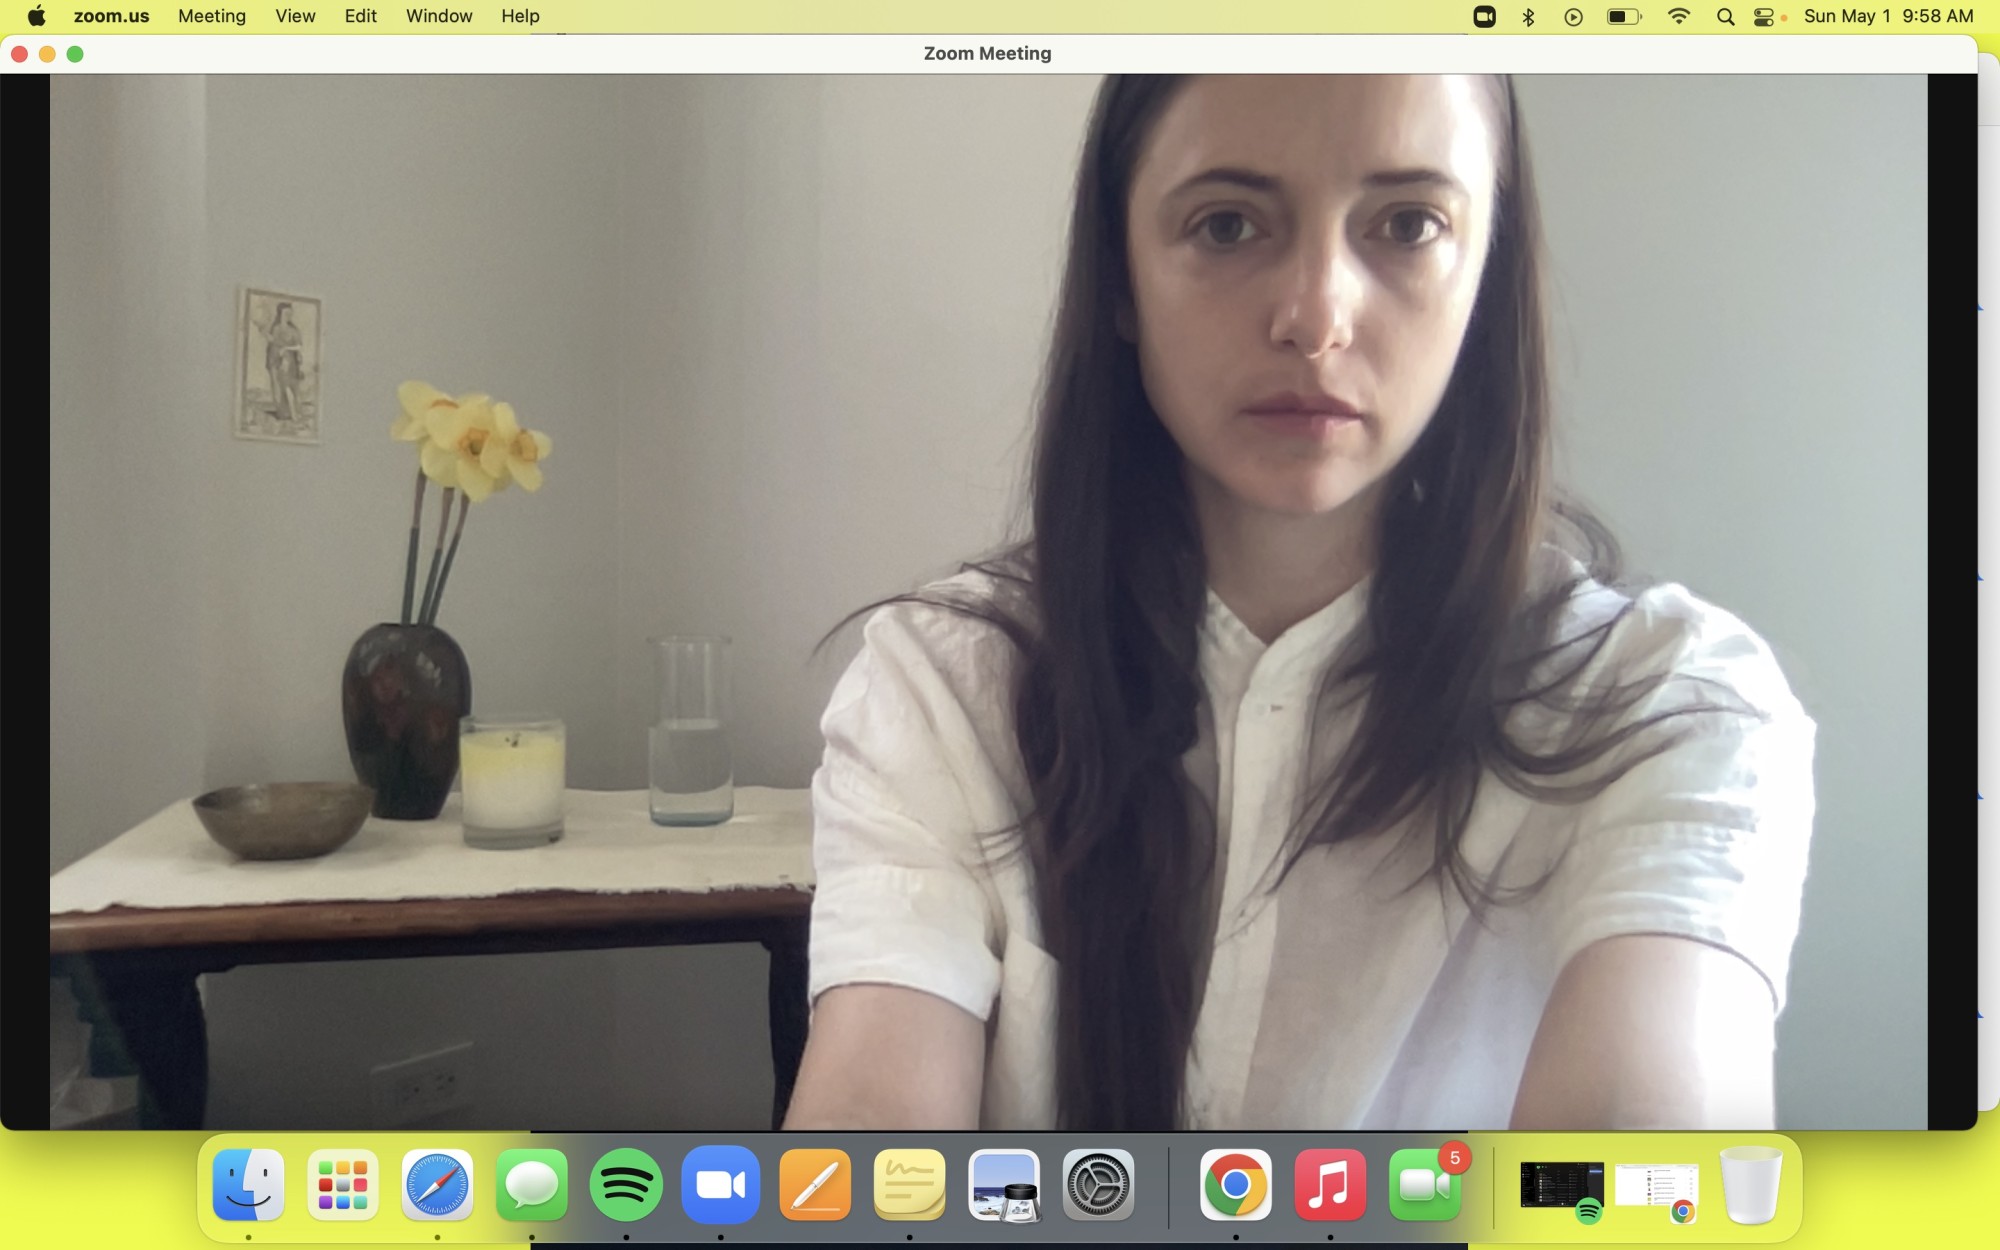 Georgia, a white woman with long brown hair, age 35, is taking a screen shot of herself while using Zoom on her computer.  Below the frame of zoom are icons showing apps that are open. Georgia wears a linen white button up shirt and is looking directly at the camera. Behind her is a table covered in a white cloth. On it sits a candle, a glass of water, a metal bowl and a vase with three daffodils.